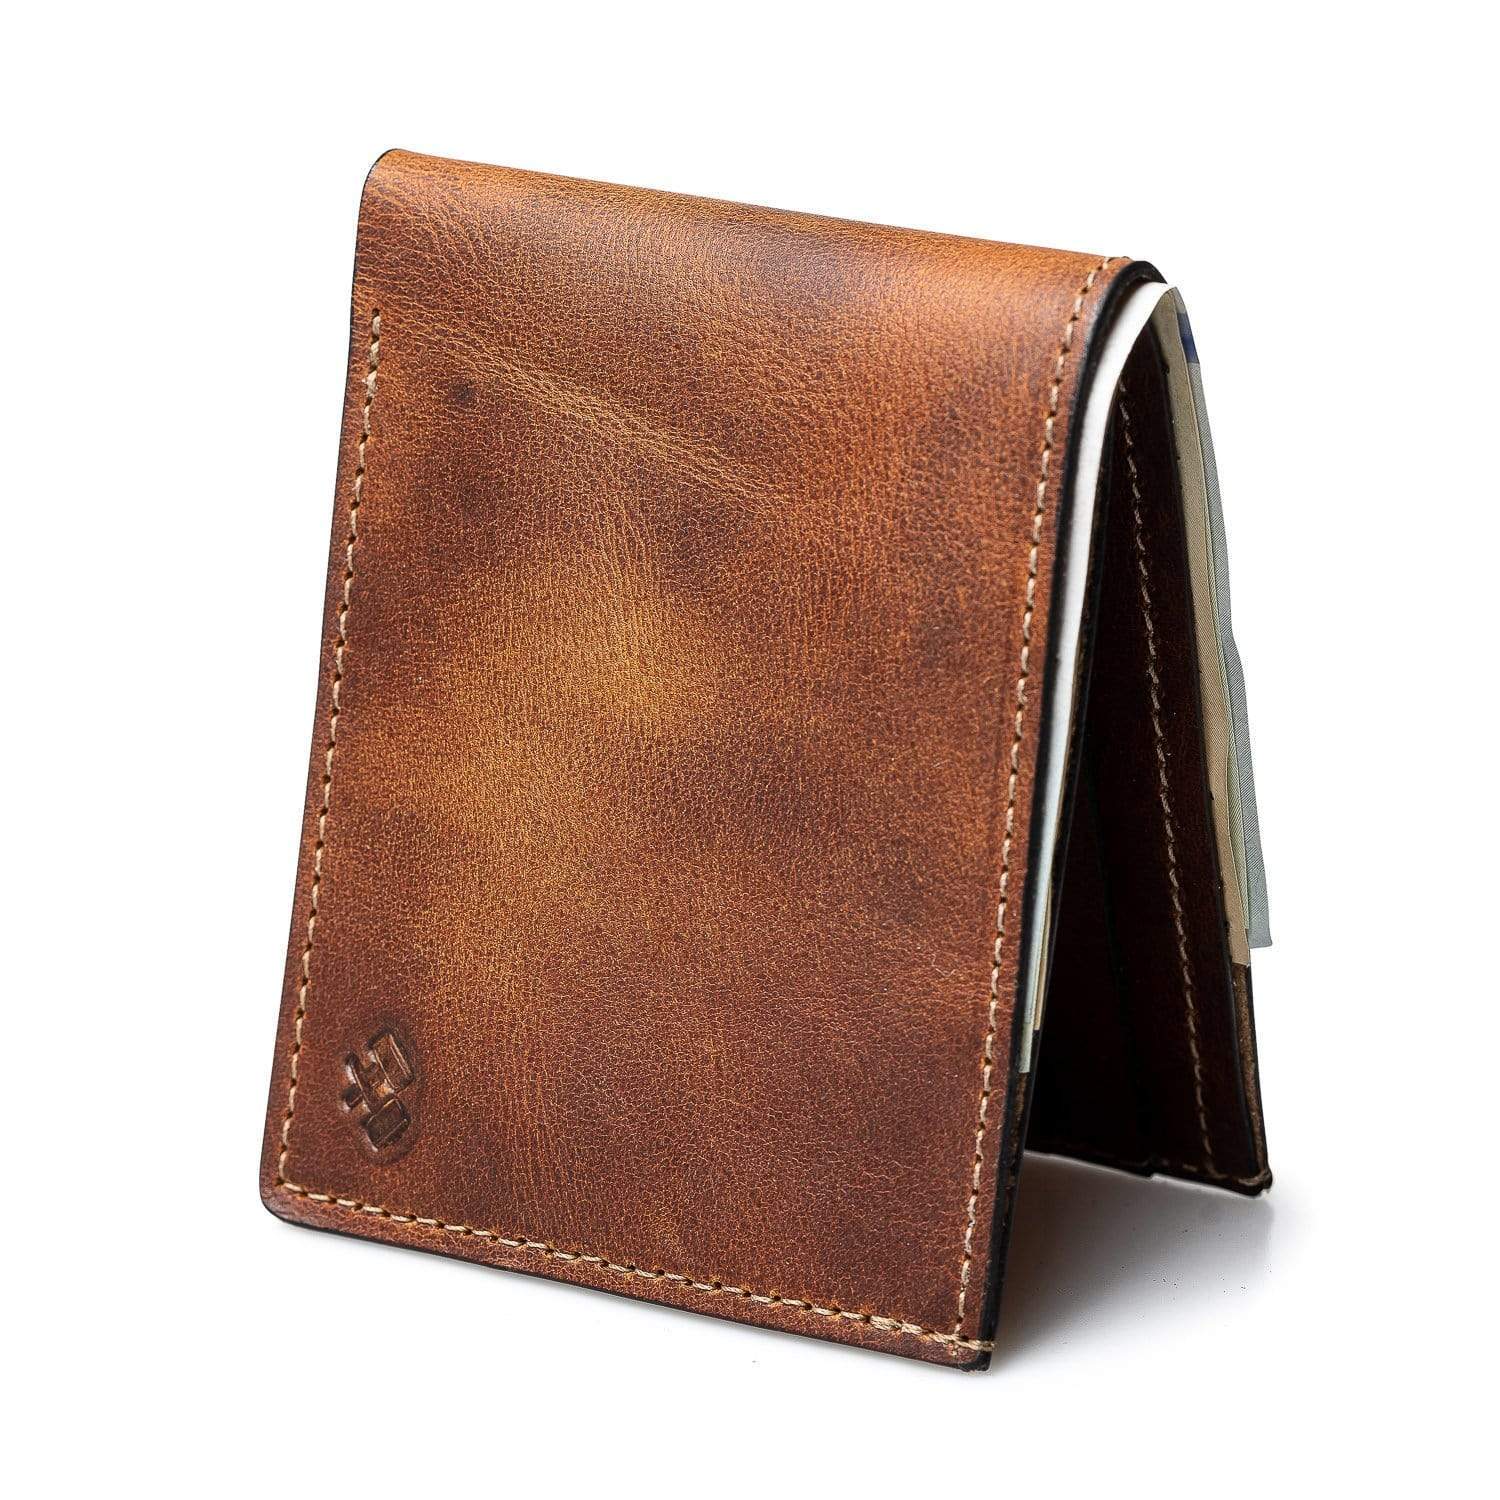 Main Street Forge Wallet Tobacco Snakebite Brown Bifold Leather Wallet For Men | Made in USA | Men's Bifold Wallets | American Made 816895021910